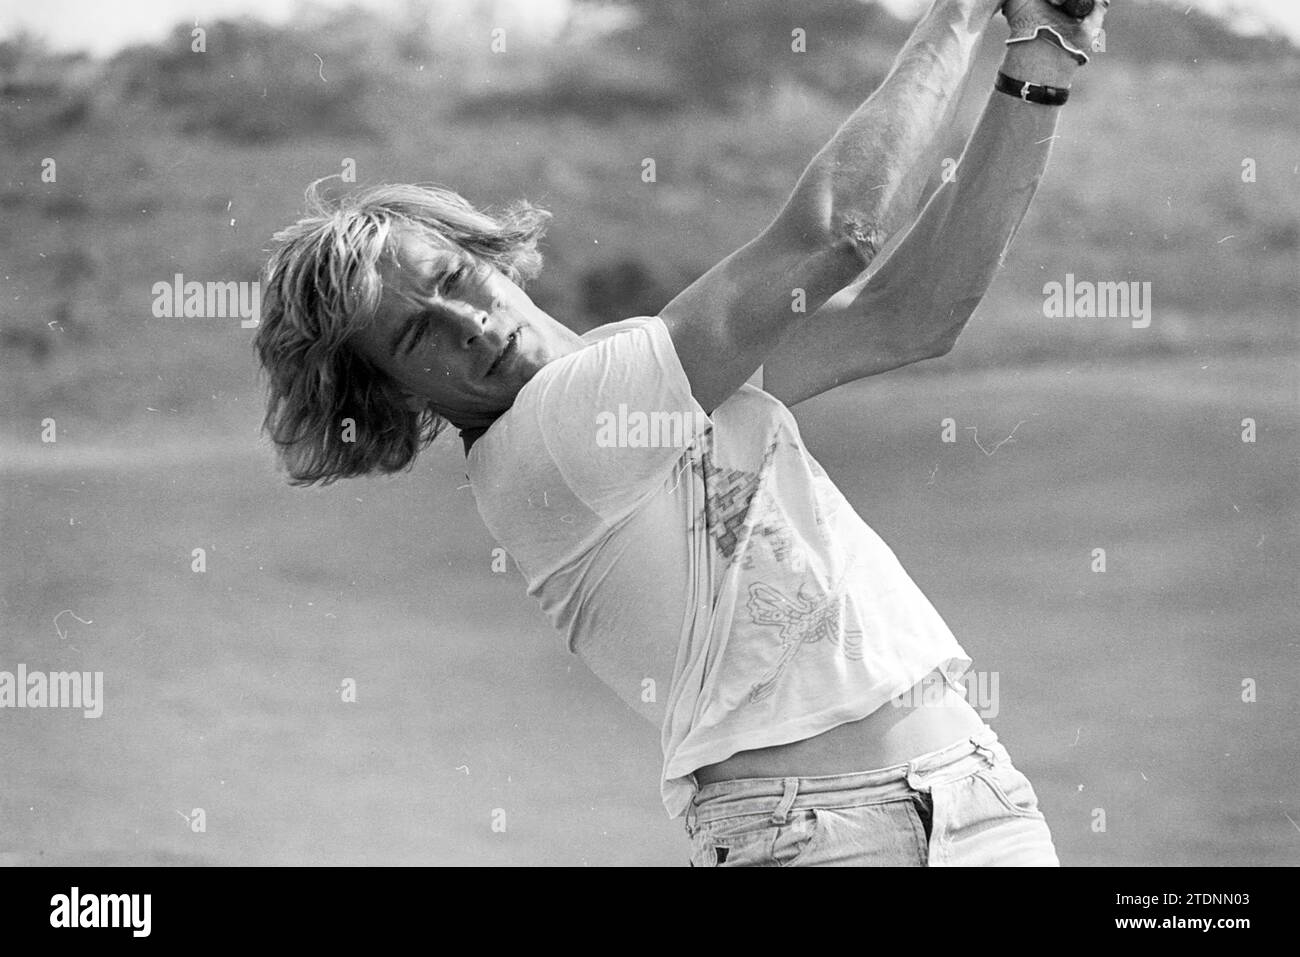 James Hunt G.P. driver Golfing Zandvoort, Golf, golfing, 26-08-1976, Whizgle News from the Past, Tailored for the Future. Explore historical narratives, Dutch The Netherlands agency image with a modern perspective, bridging the gap between yesterday's events and tomorrow's insights. A timeless journey shaping the stories that shape our future Stock Photo